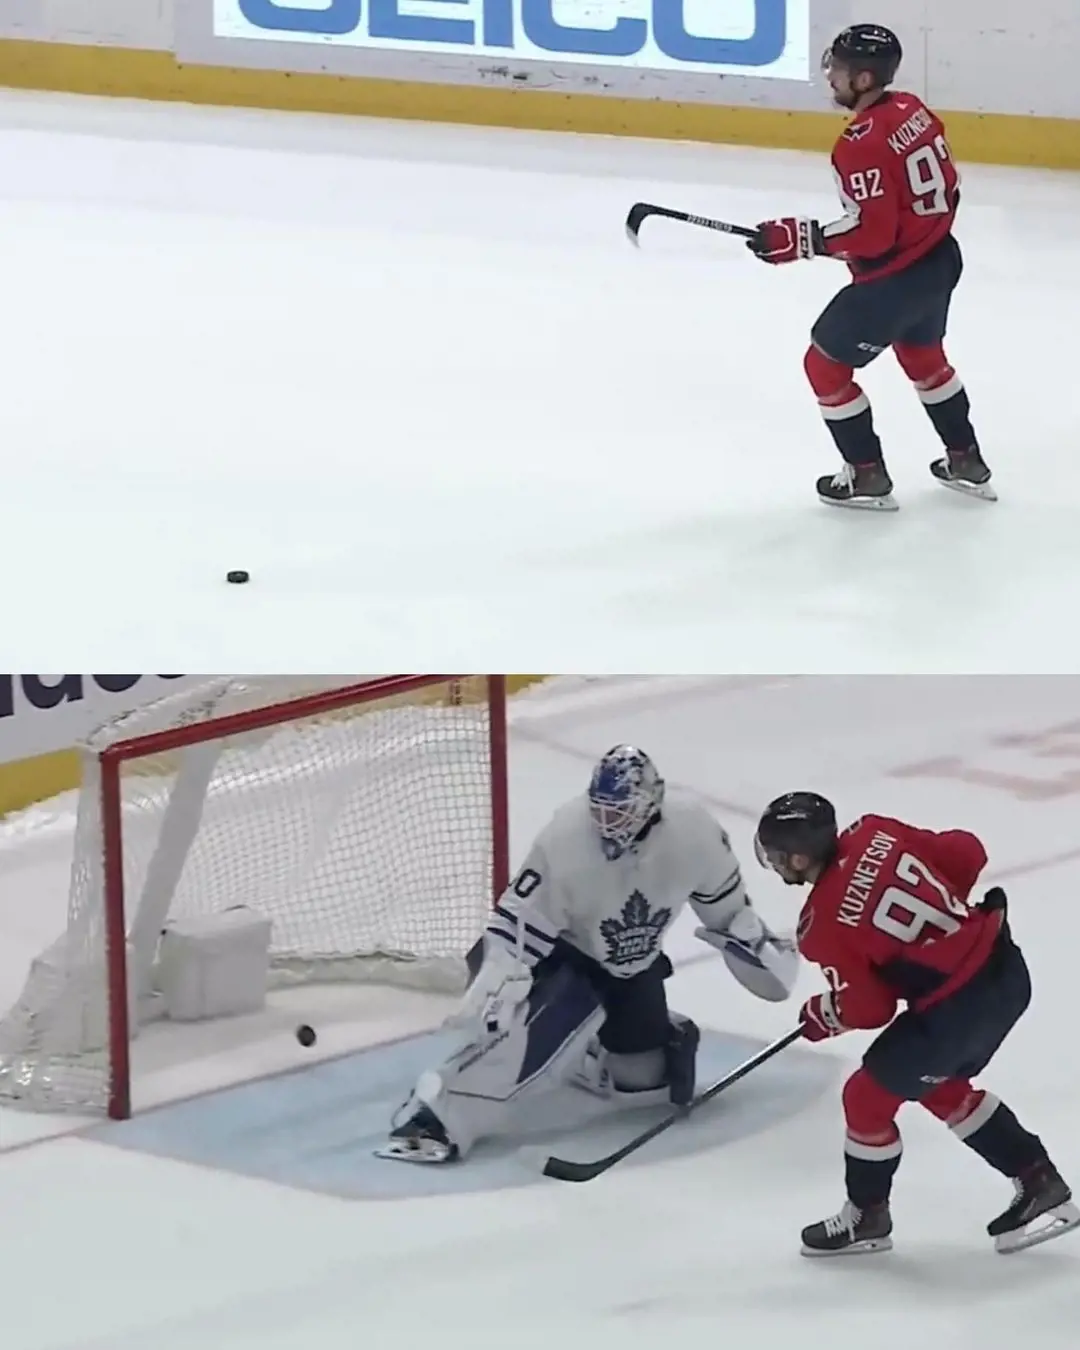 Kuznetsov from the Capitals, scoring a shootout goal against the goaltender of the Maple Leafs.